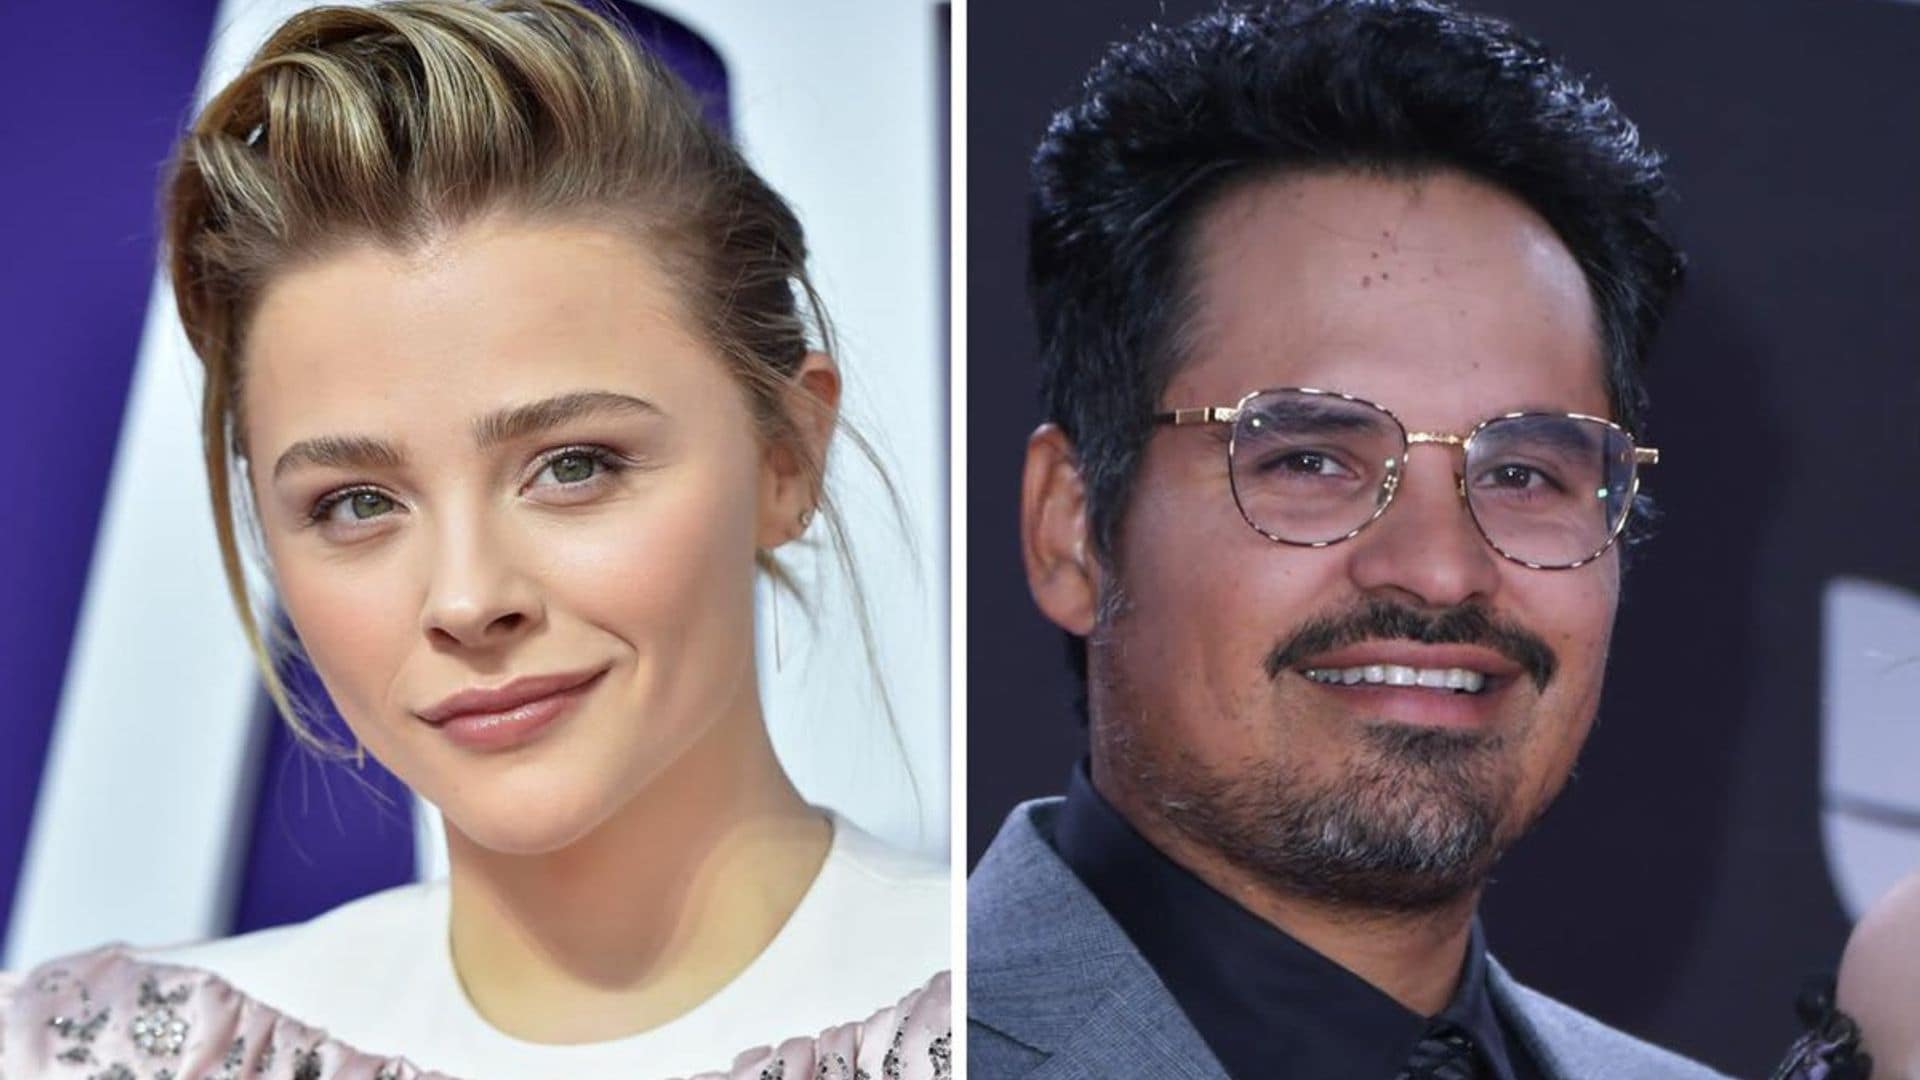 Chloë Grace Moretz and Michael Pena are the perfect duos for ‘Tom & Jerry’